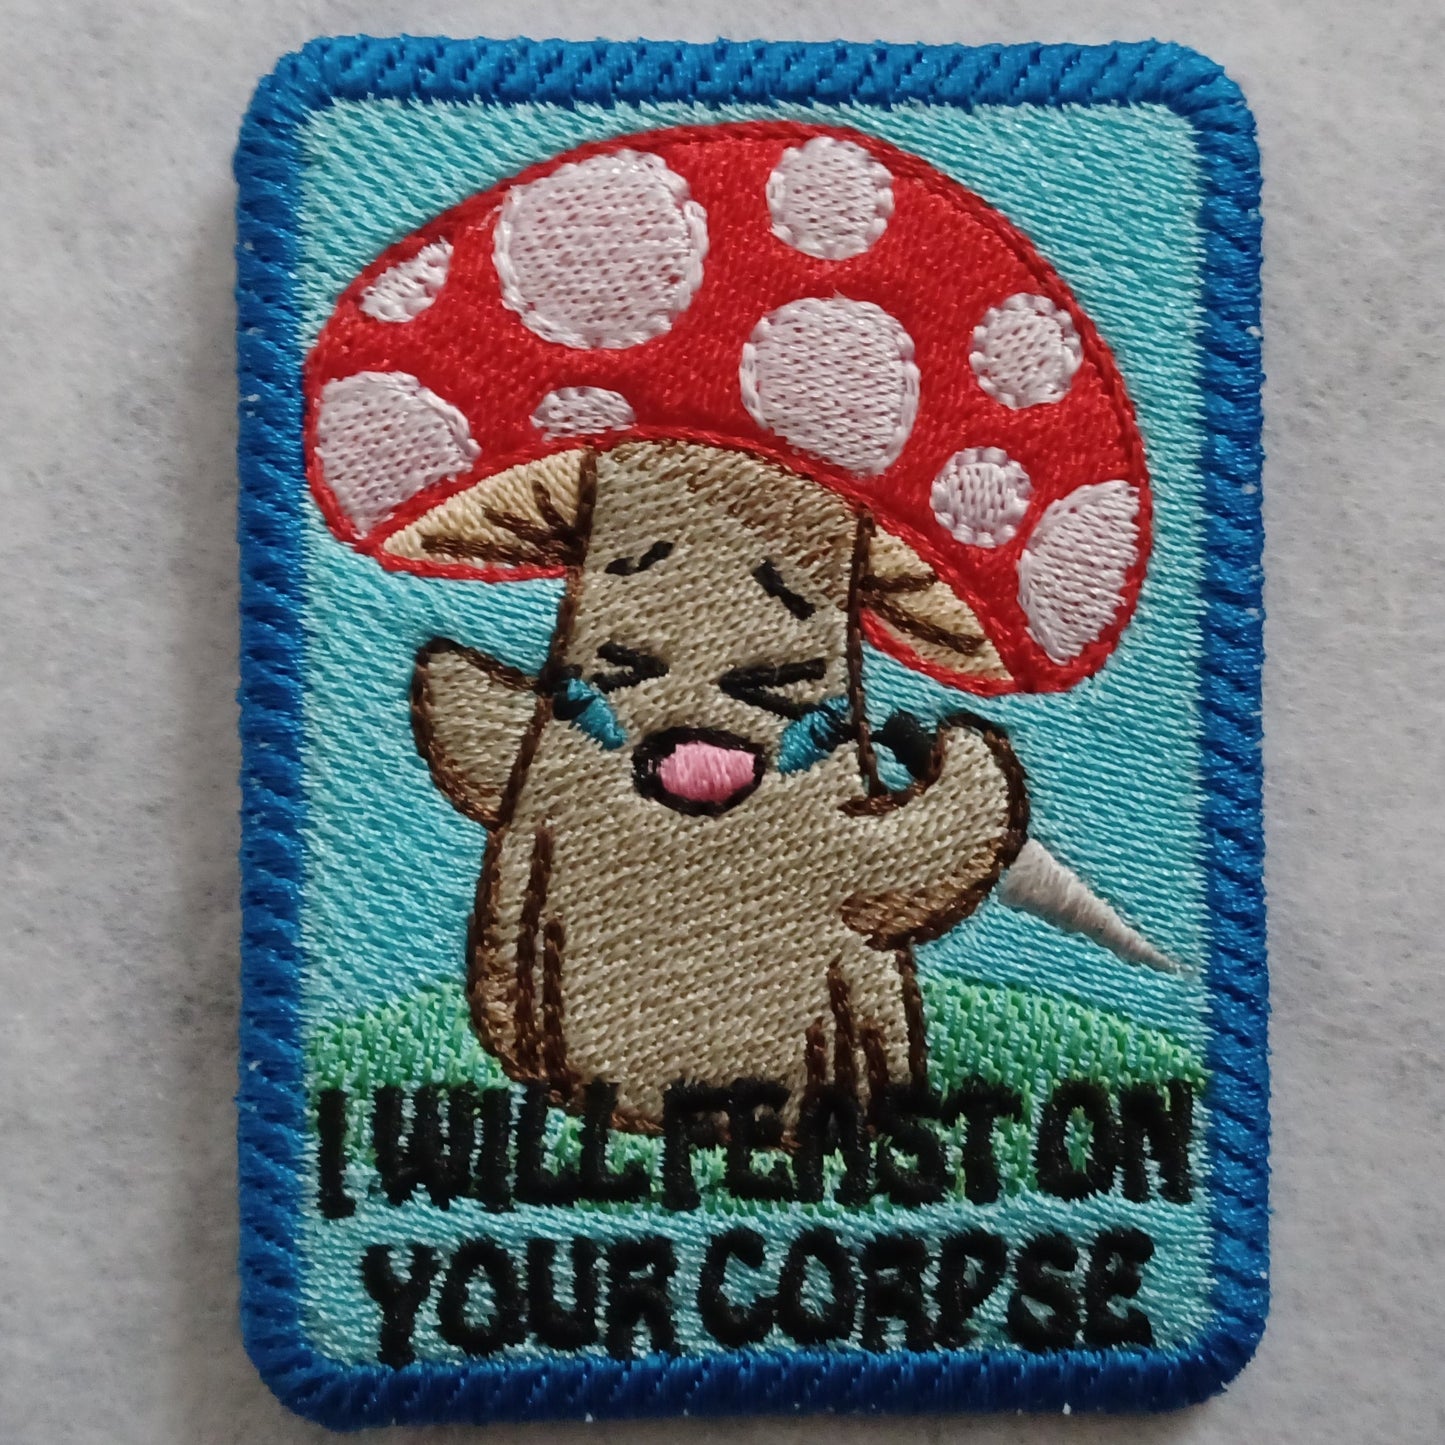 I Will Feast on Your Corpse Embroidered Patch